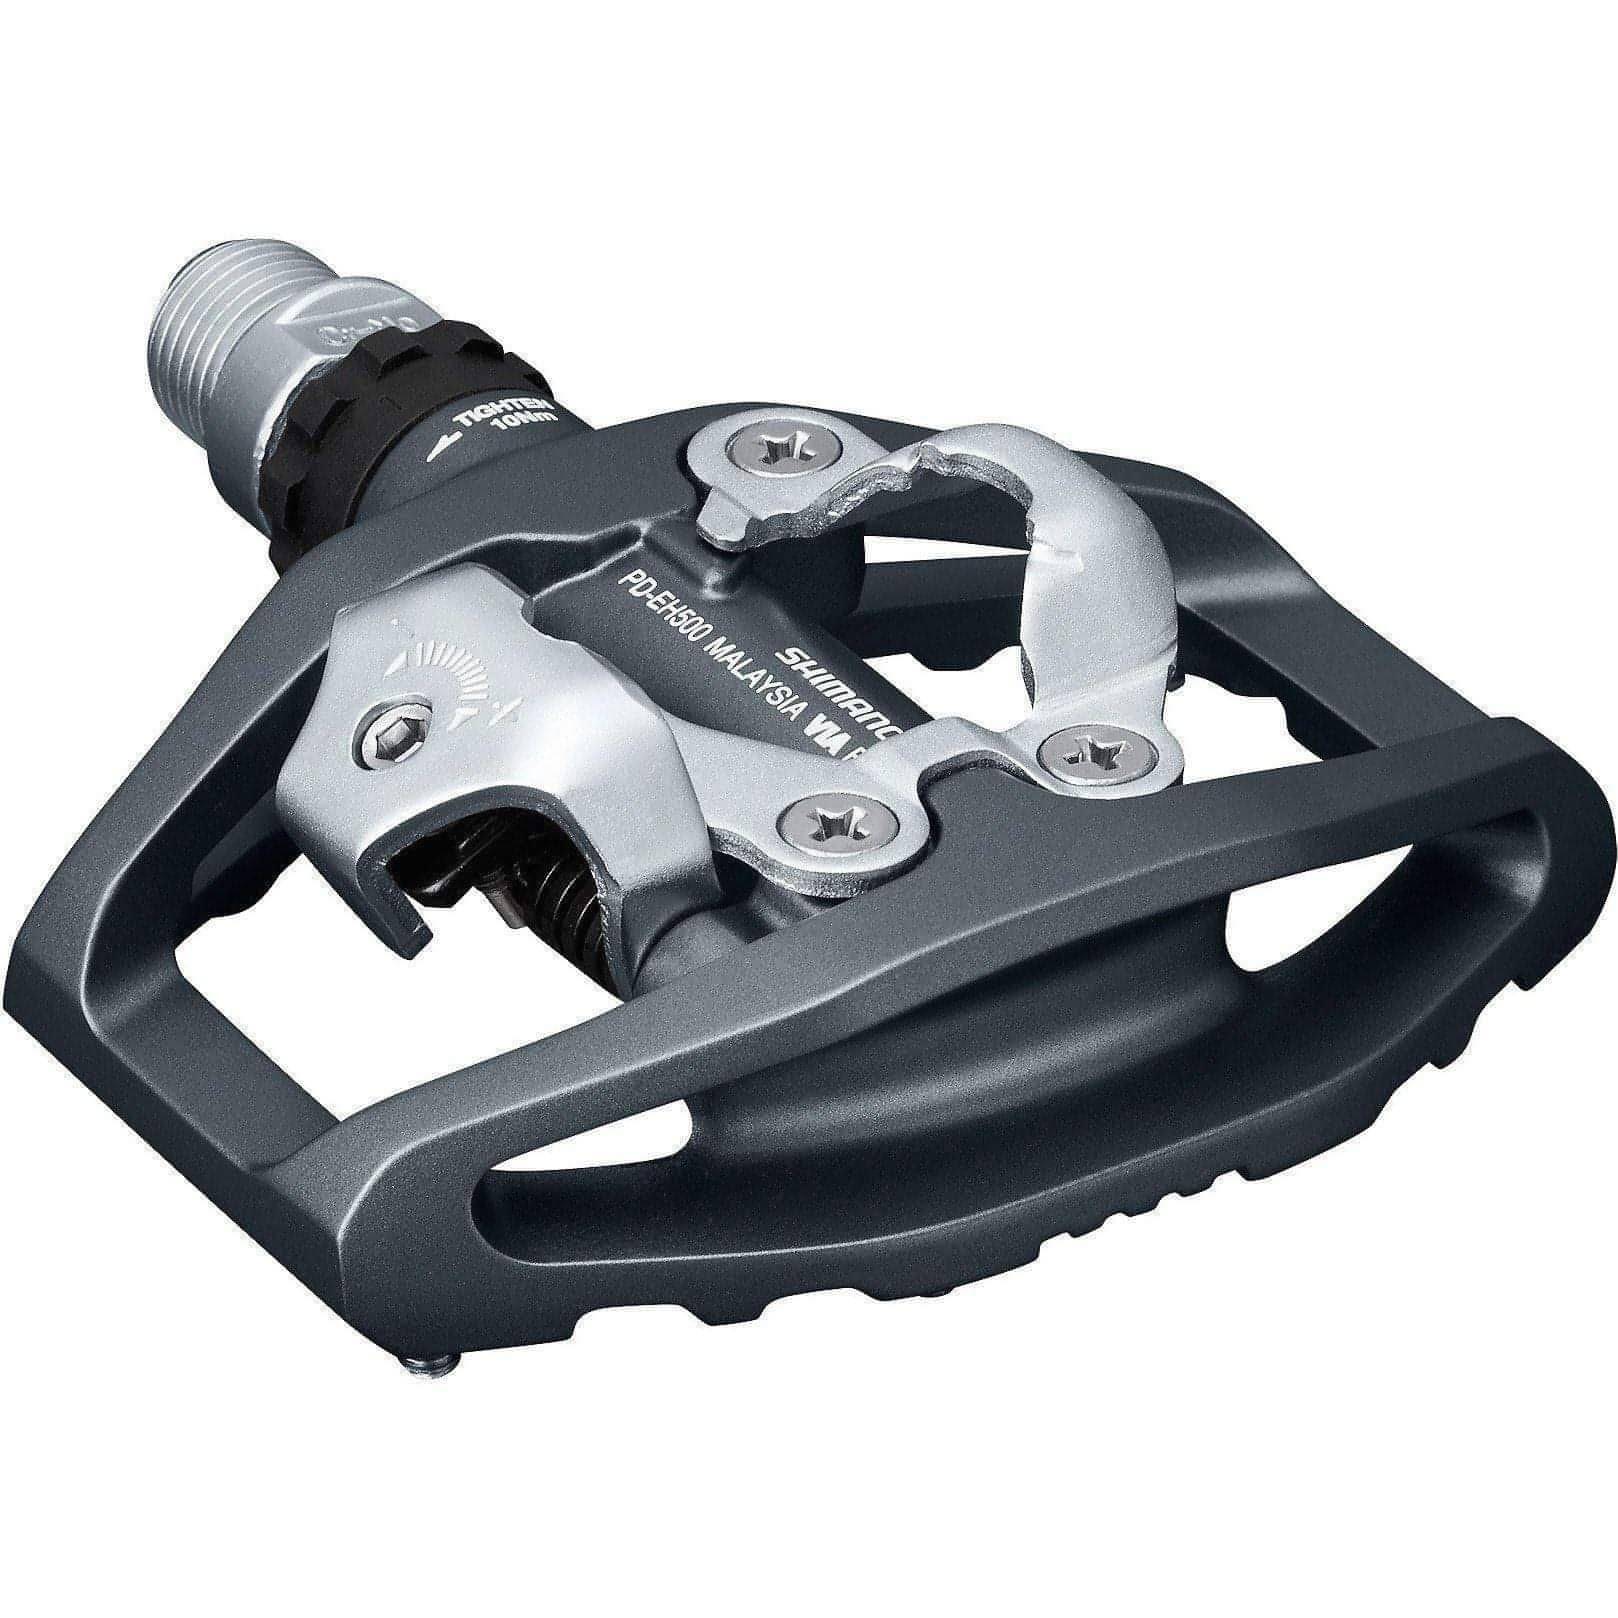 Shimano PD-EH500 SPD Pedals - Black 4524667866312 - Start Fitness